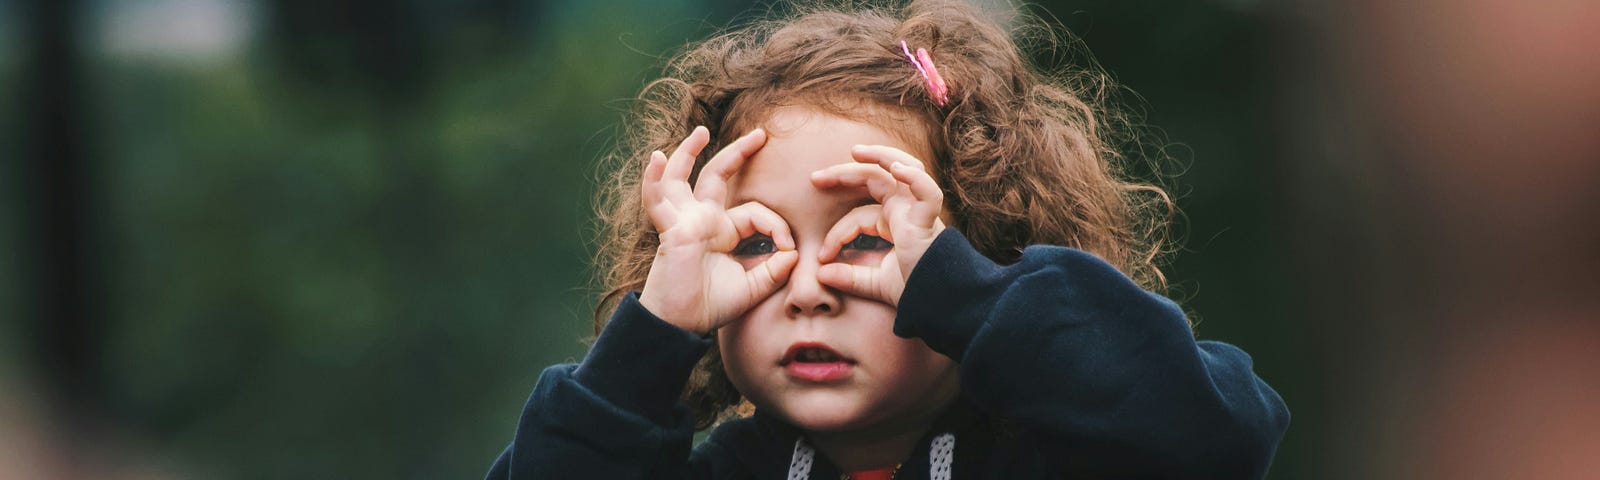 A little girl with brown, curly hair sitting on her dad’s shoulders, pretending to look through binoculars.